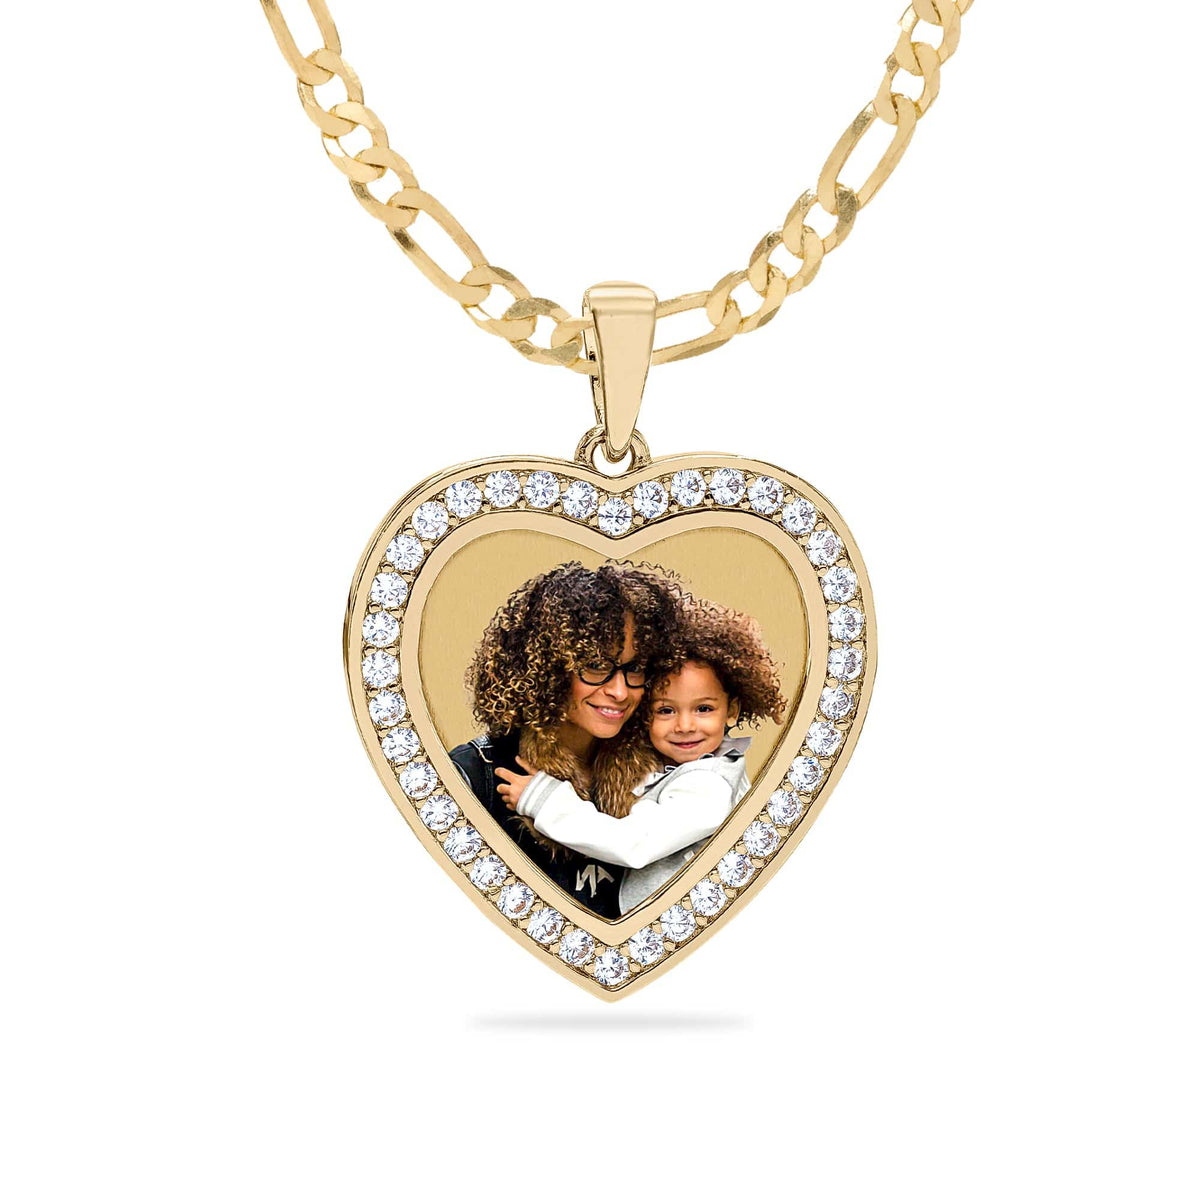 Gold Plated / Figaro Chain Heart Shaped Photo Pendant with Stones